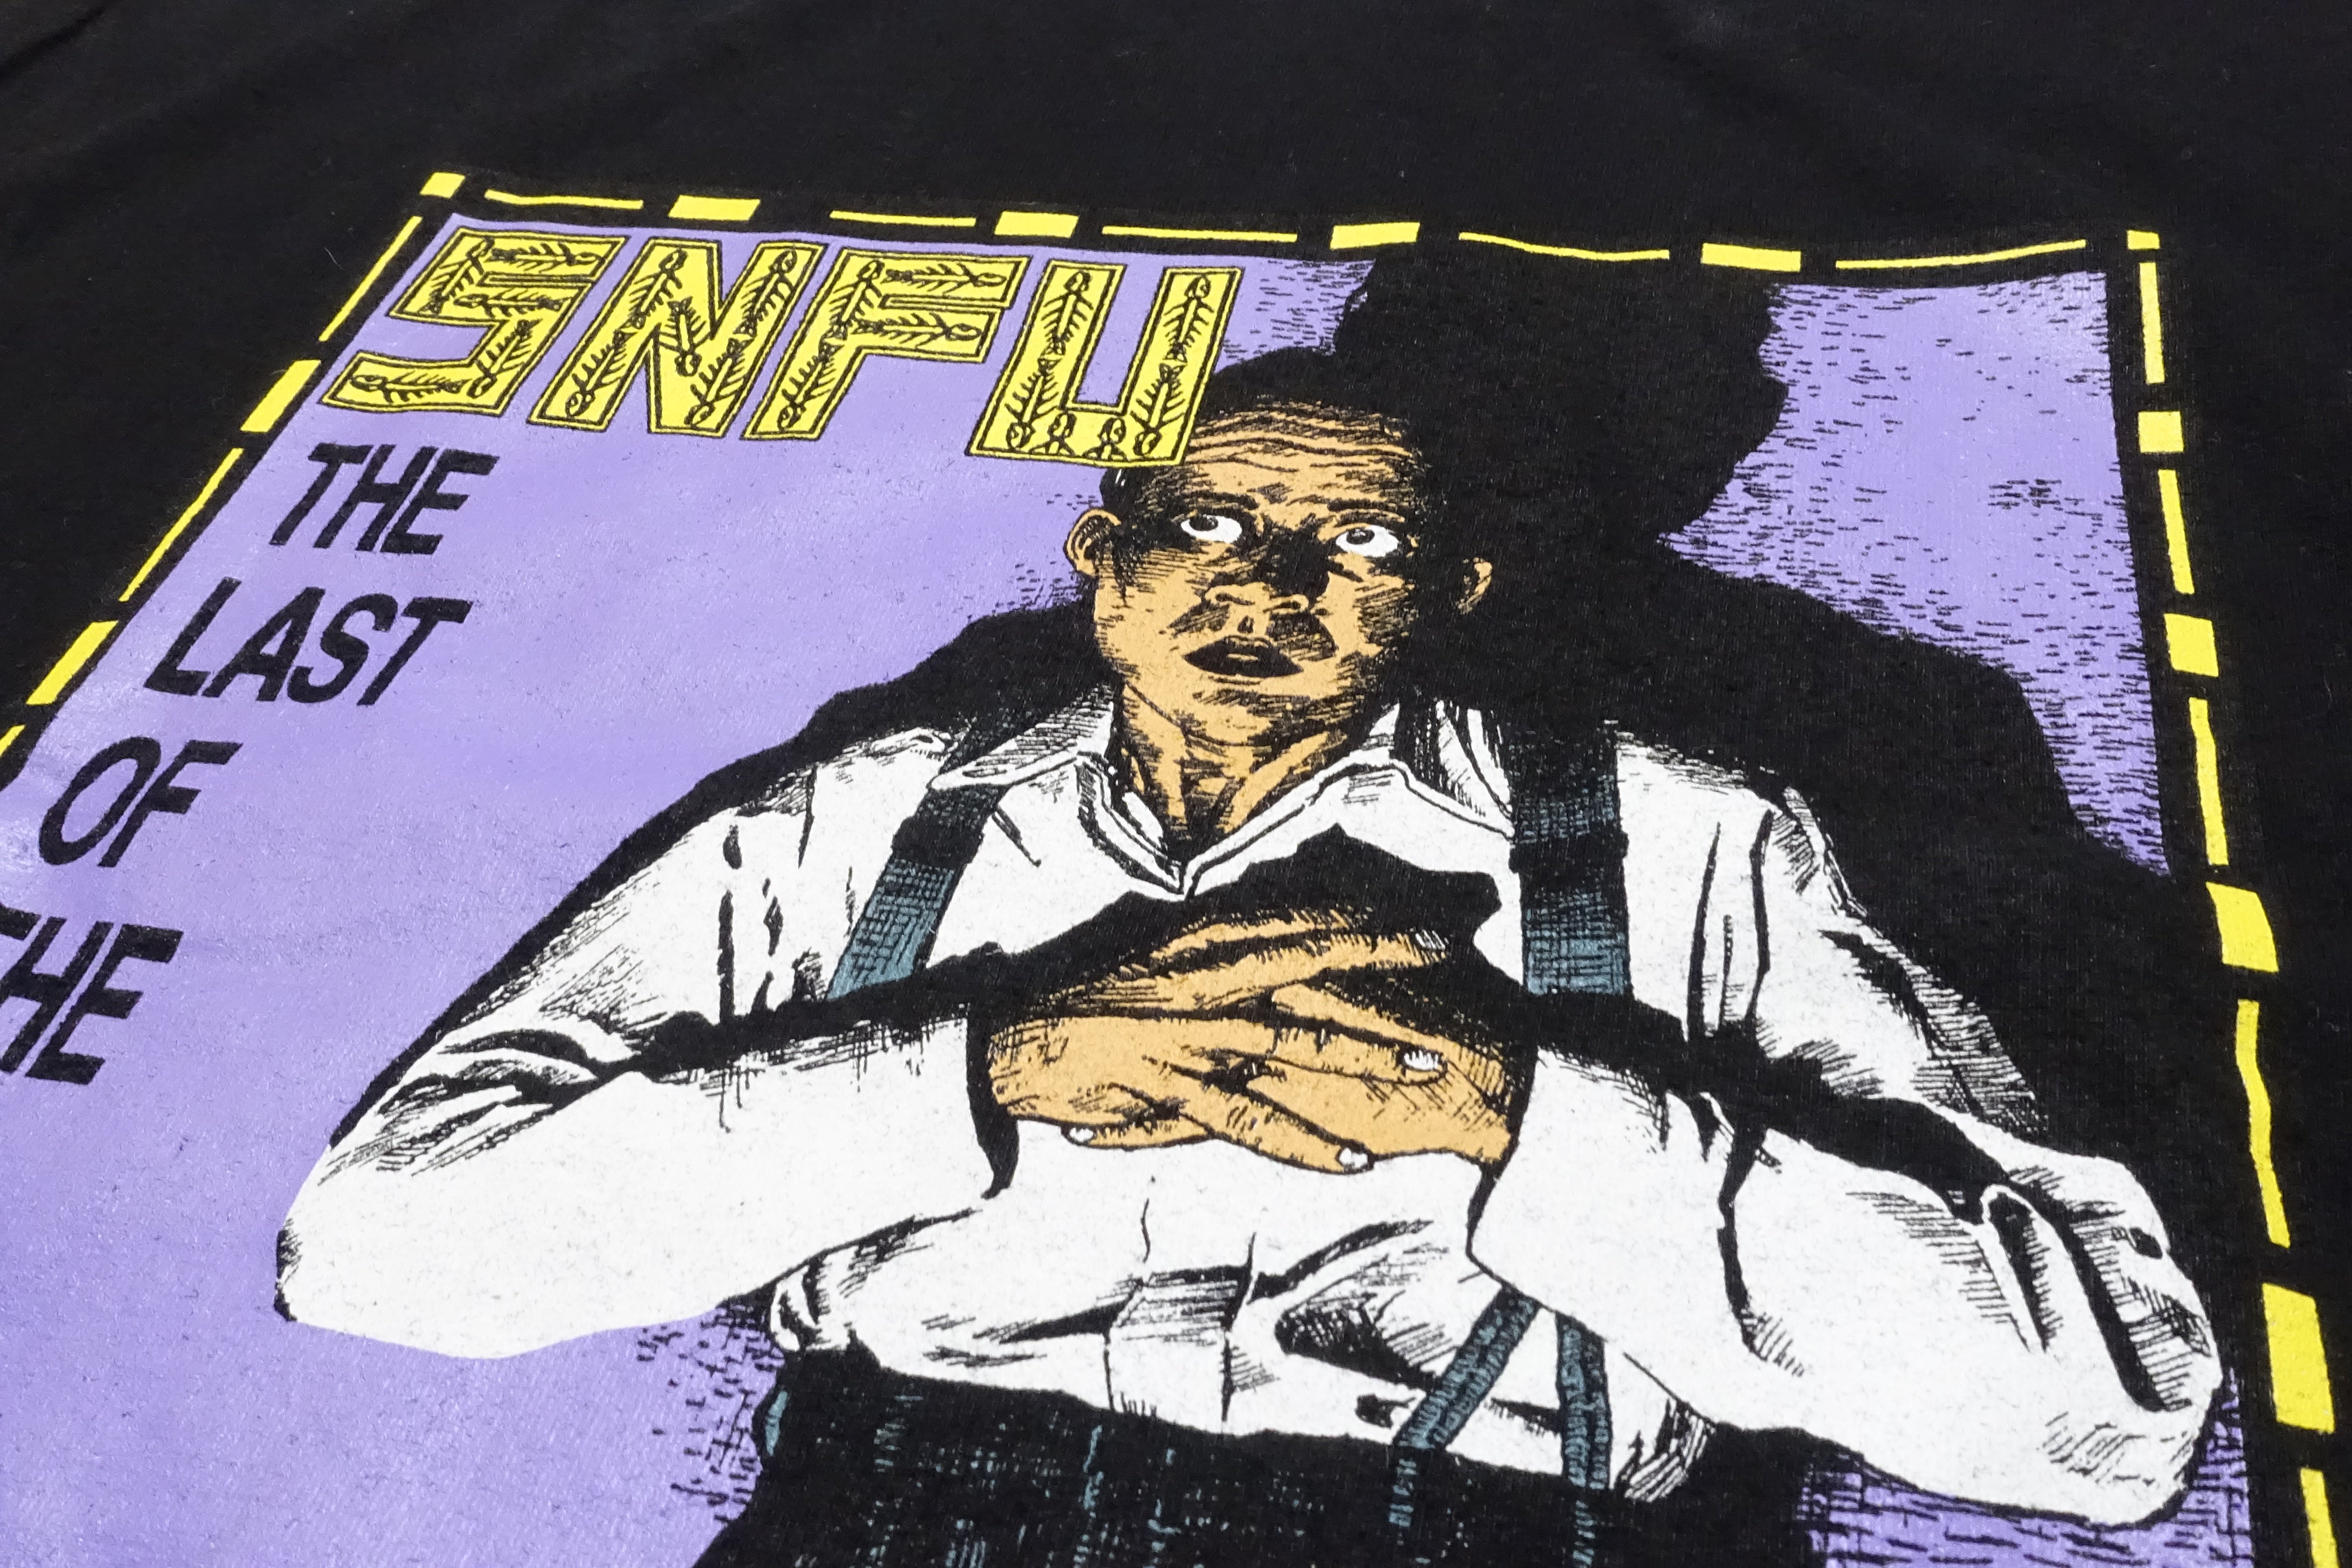 SNFU - The Last Of The Big Time Suspenders Tour Shirt Size Large